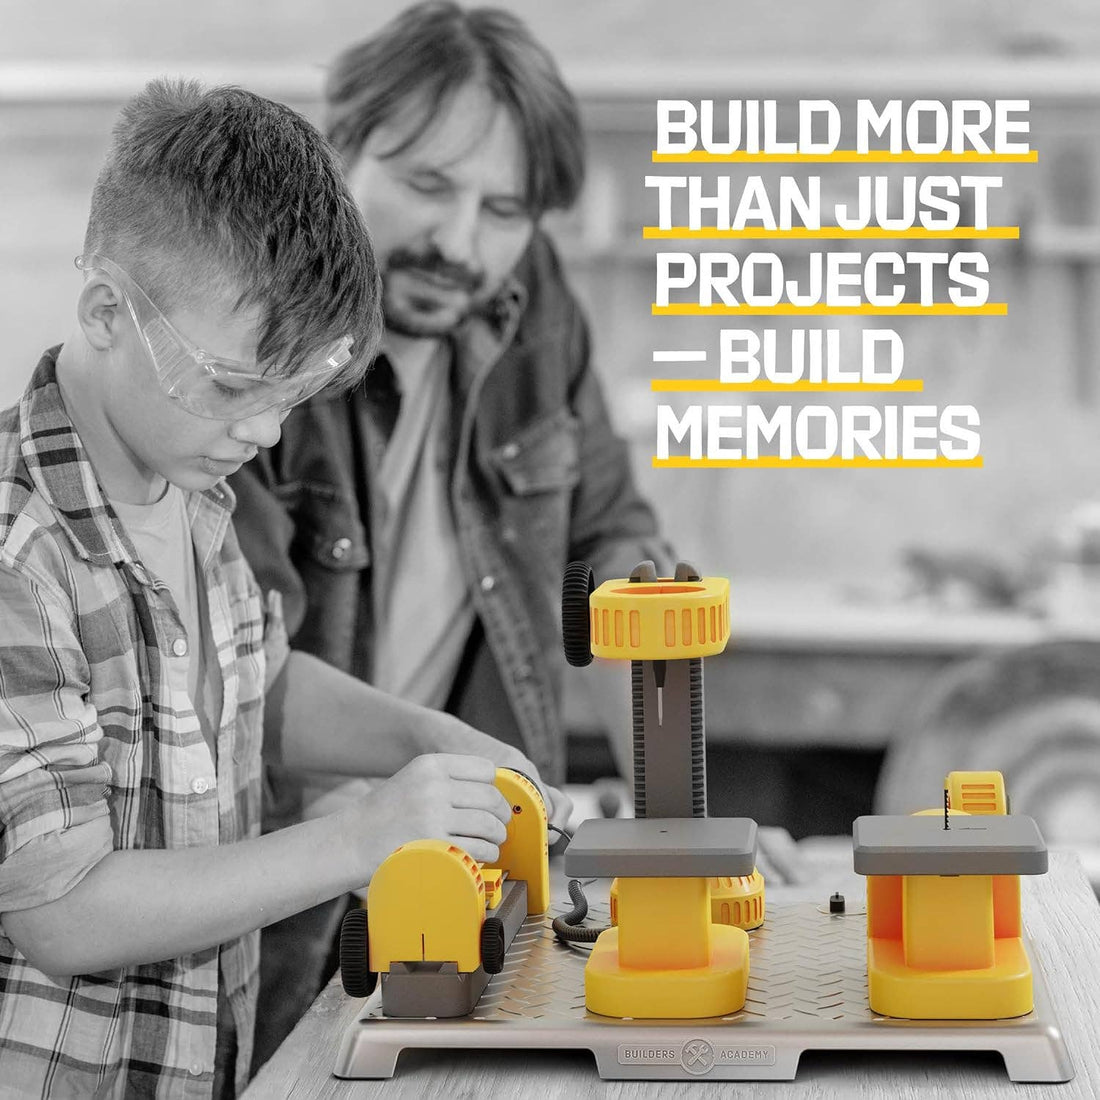 4 in 1 Woodworking Station for Kids